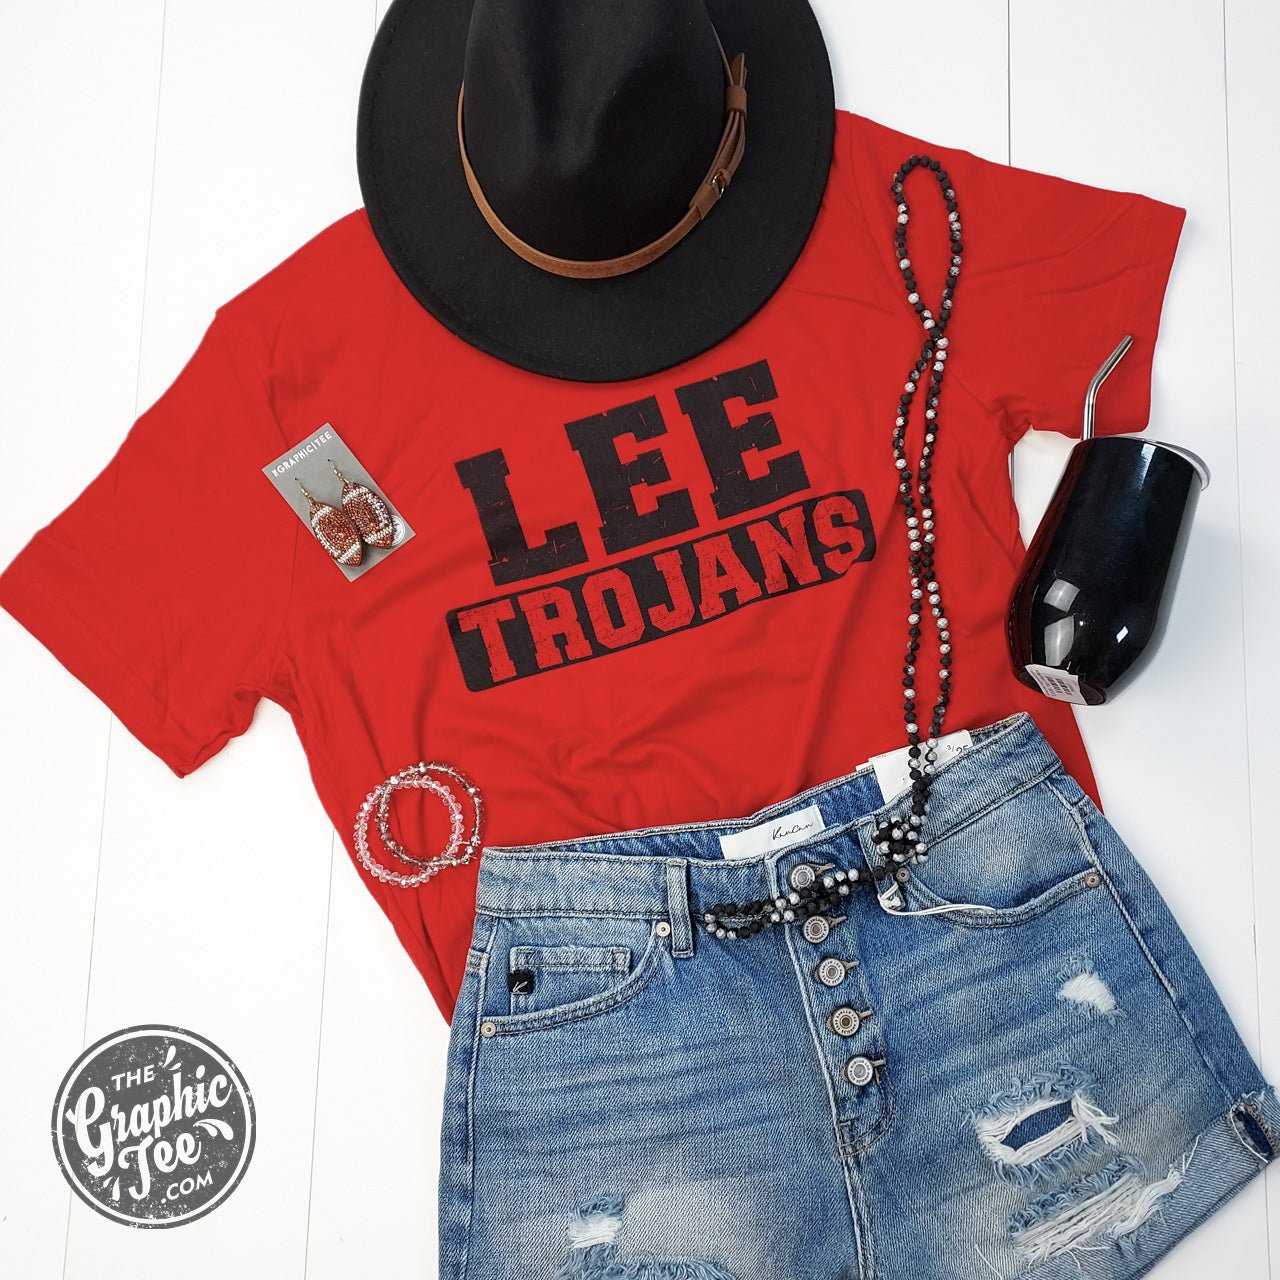 Lee Trojans Red Short Sleeve Unisex Tee - The Graphic Tee